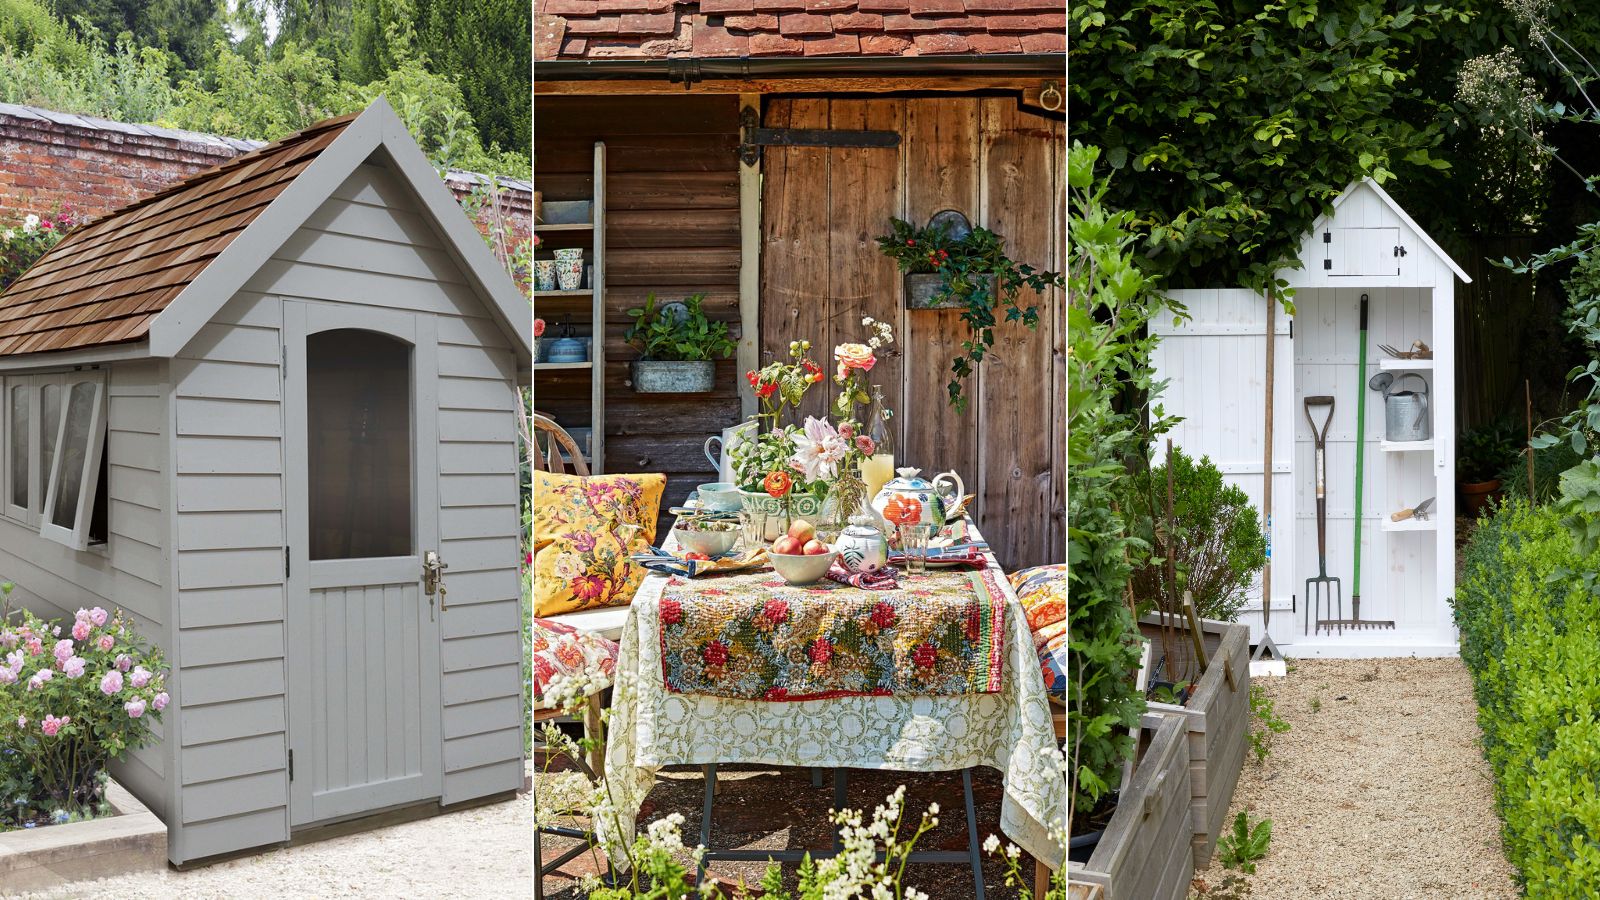 shed ideas: create an outdoor oasis with these smart designs |